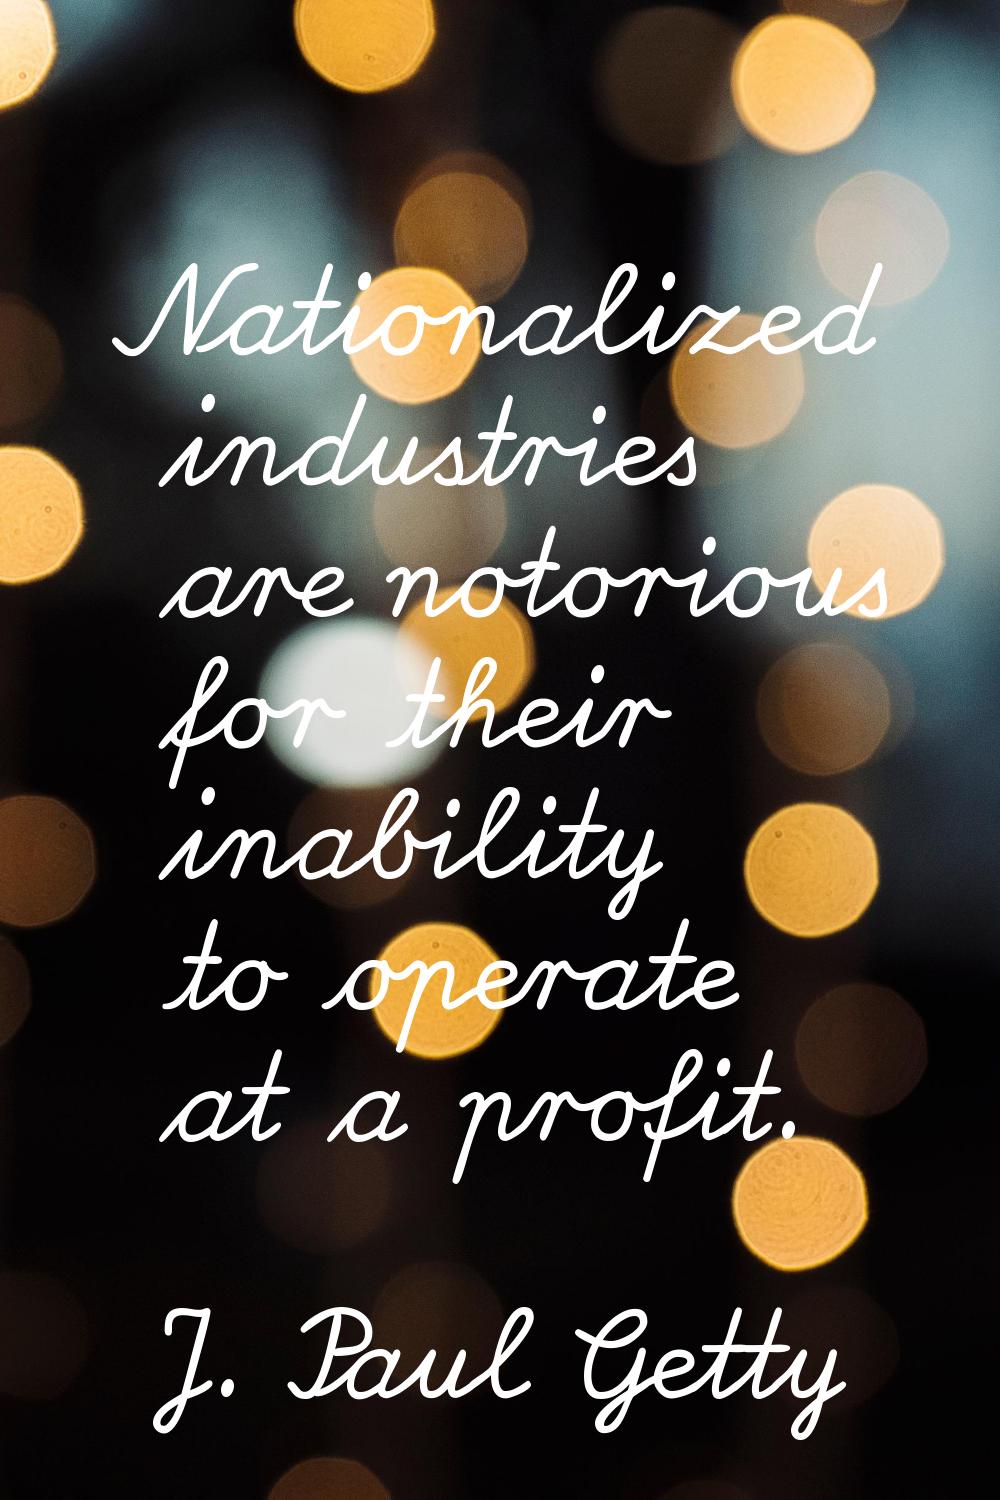 Nationalized industries are notorious for their inability to operate at a profit.